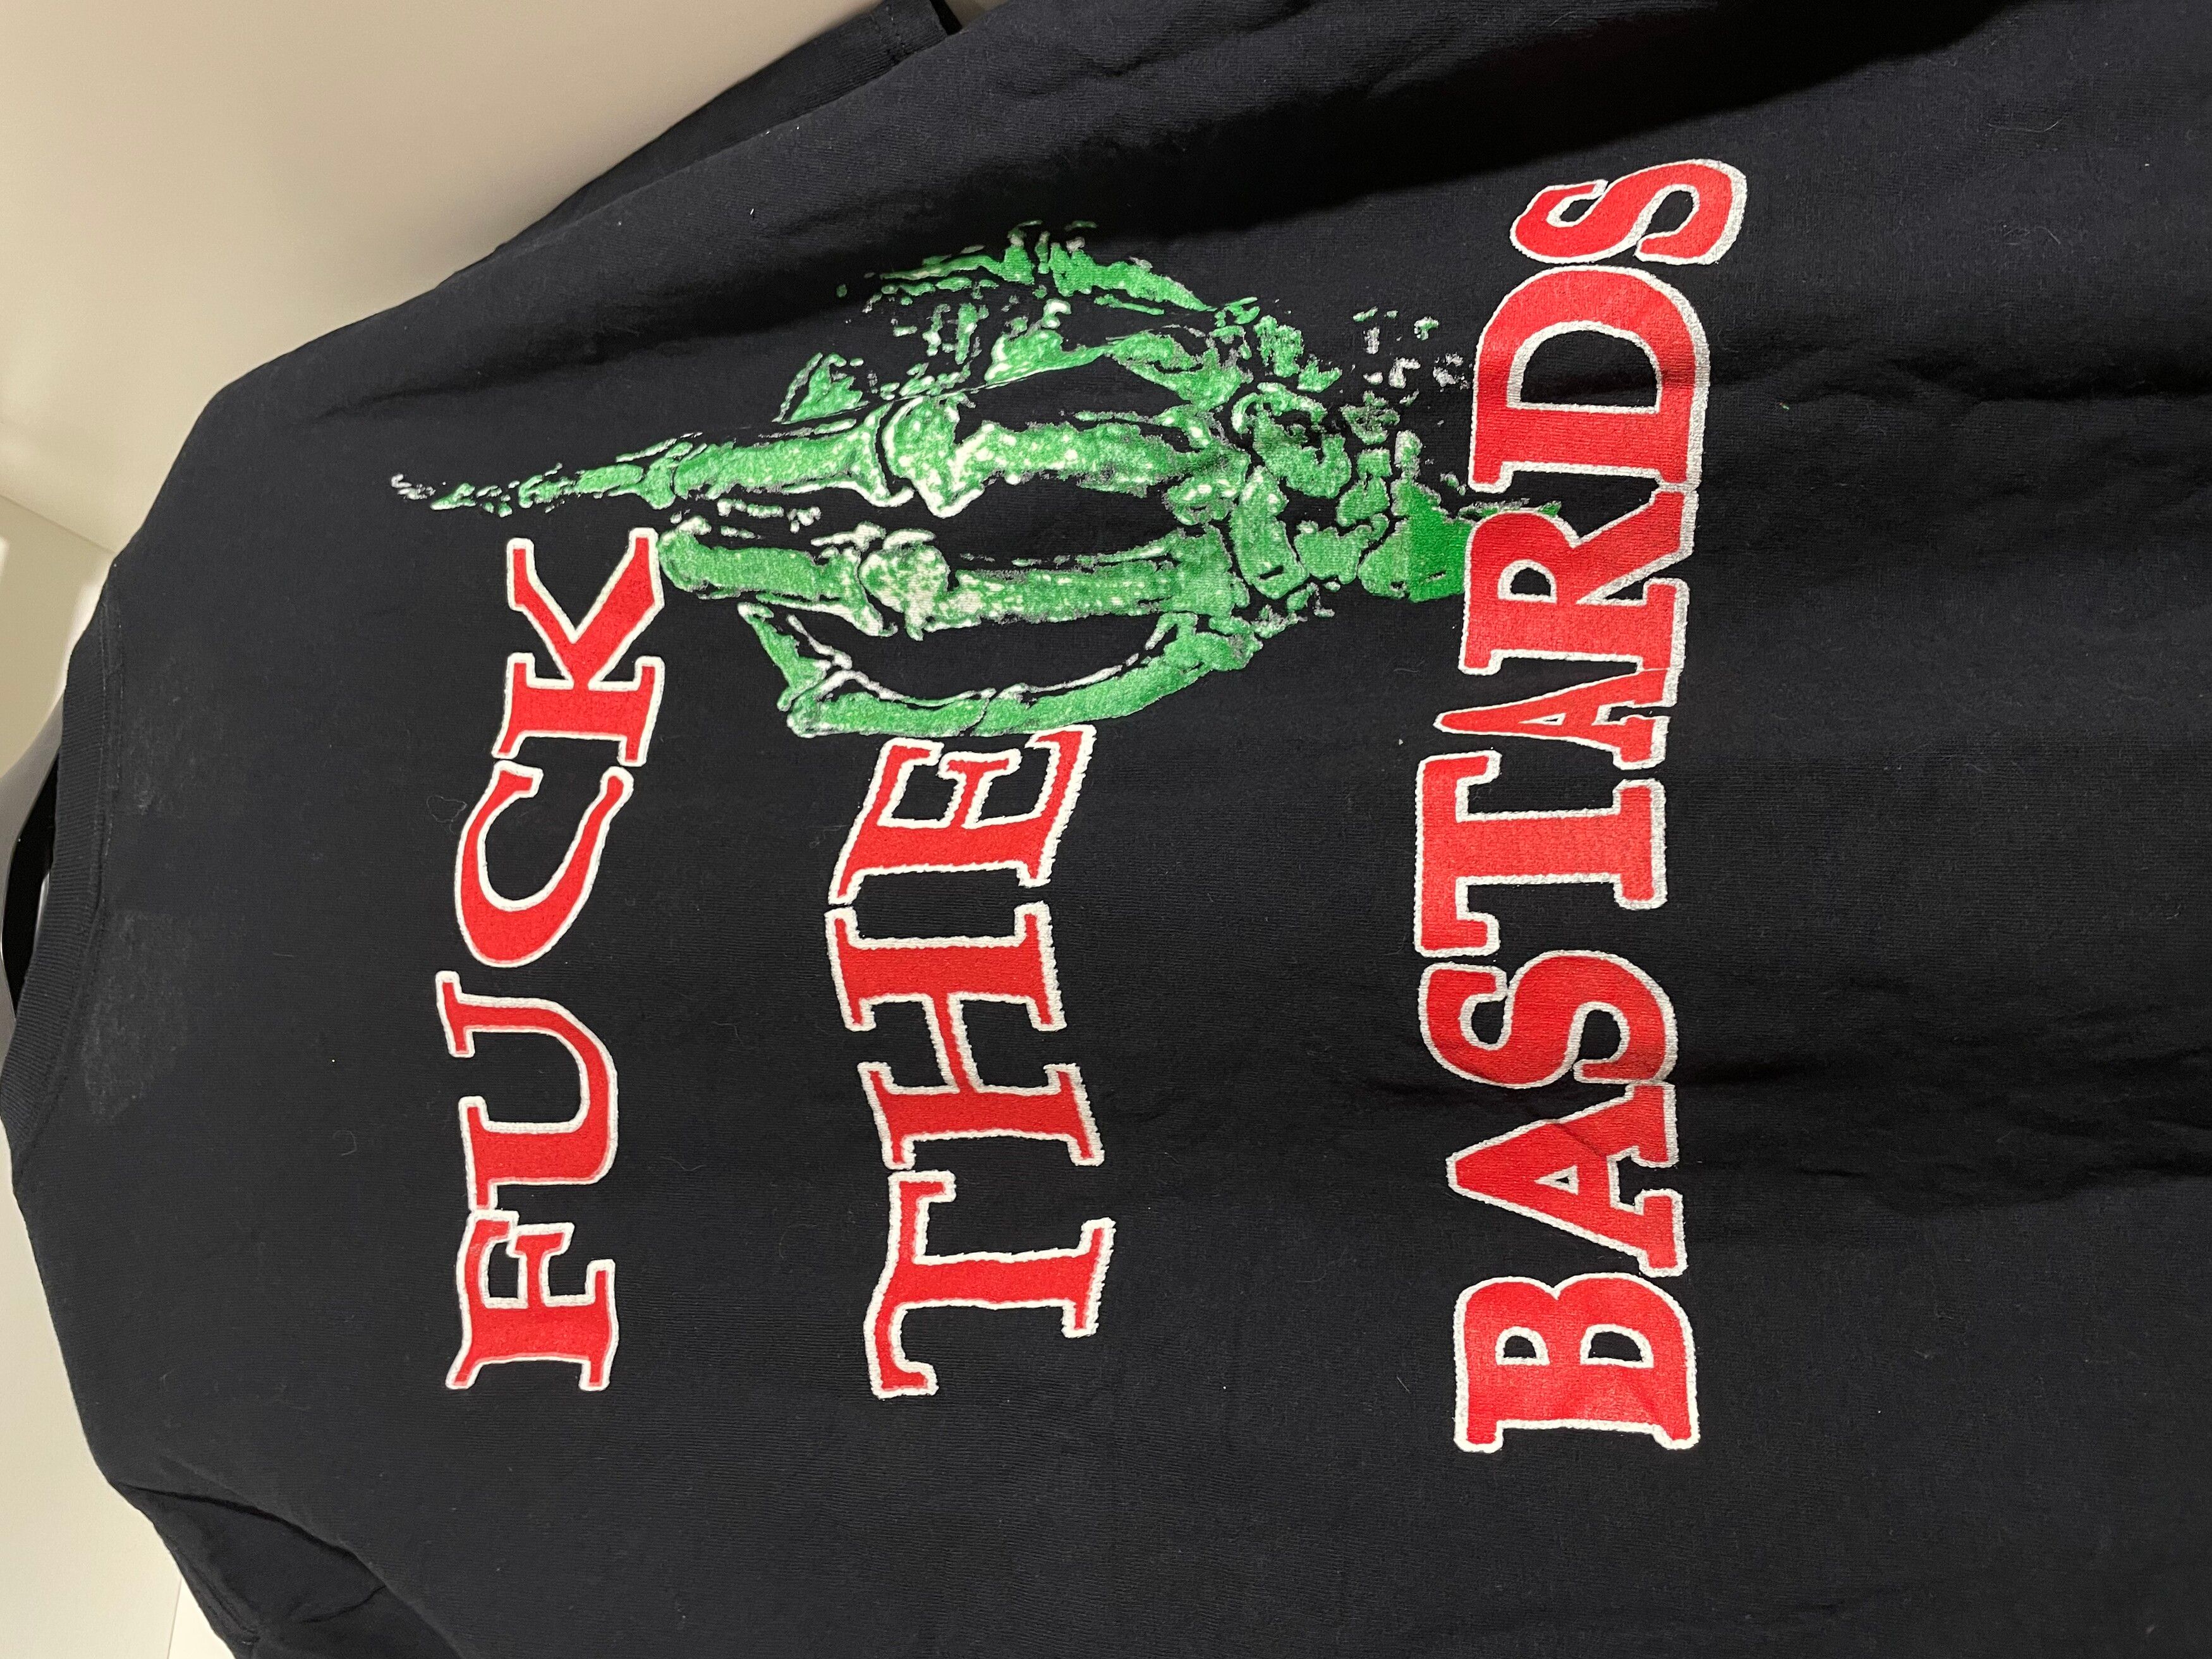 Vintage Vintage The Exploited 2001 Punk Band Fuck the bastards tee Size US XL / EU 56 / 4 - 6 Preview